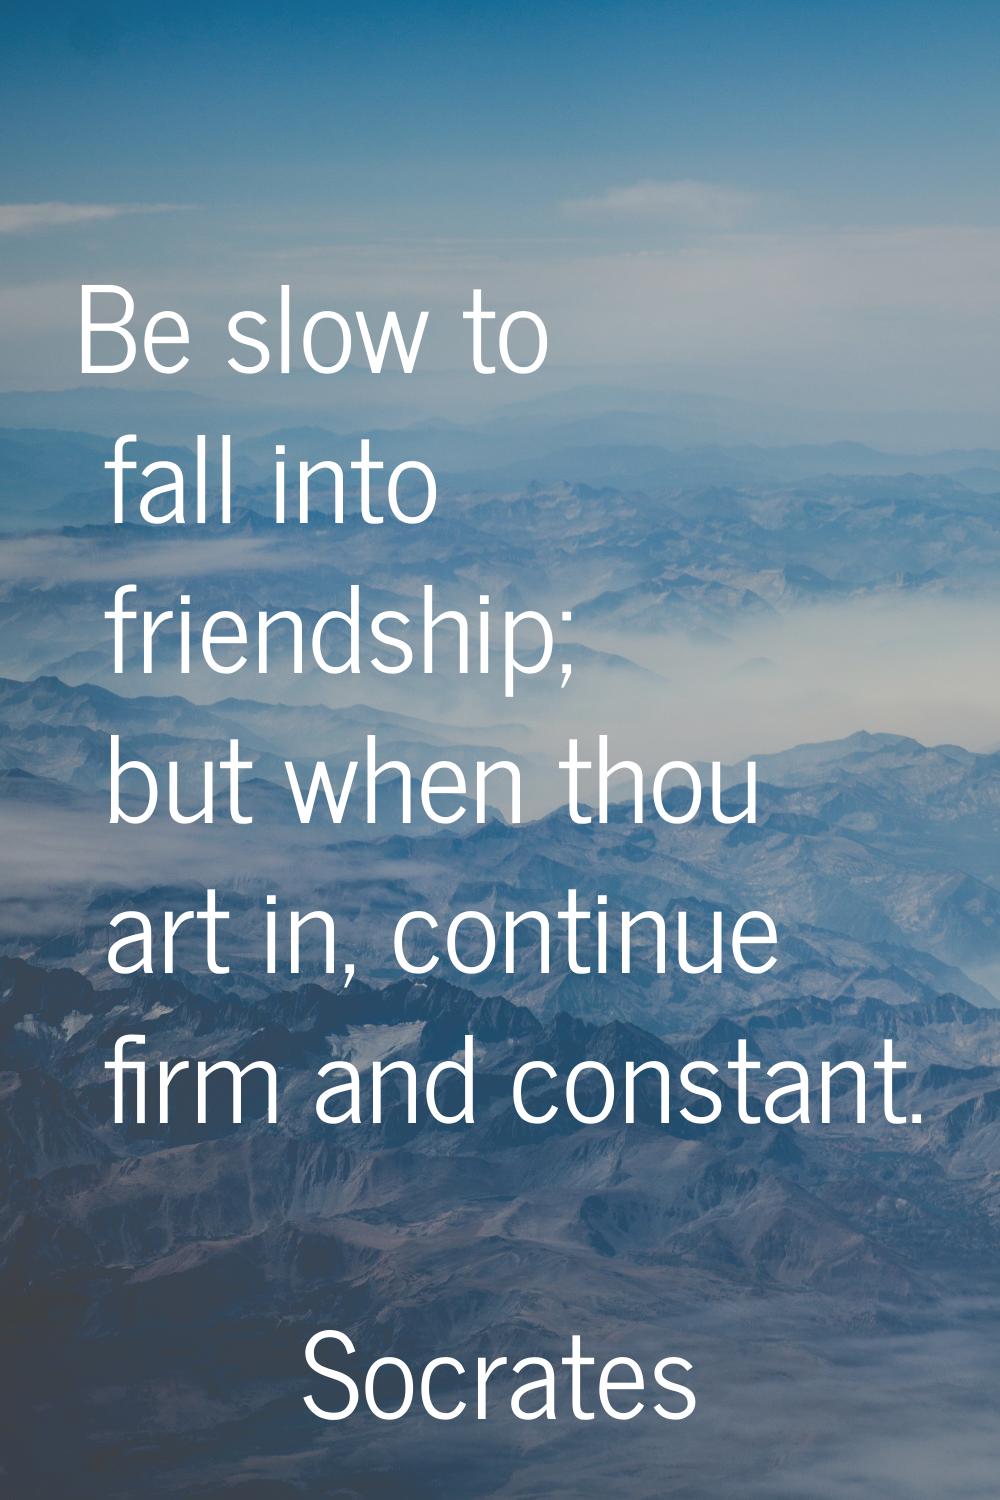 Be slow to fall into friendship; but when thou art in, continue firm and constant.